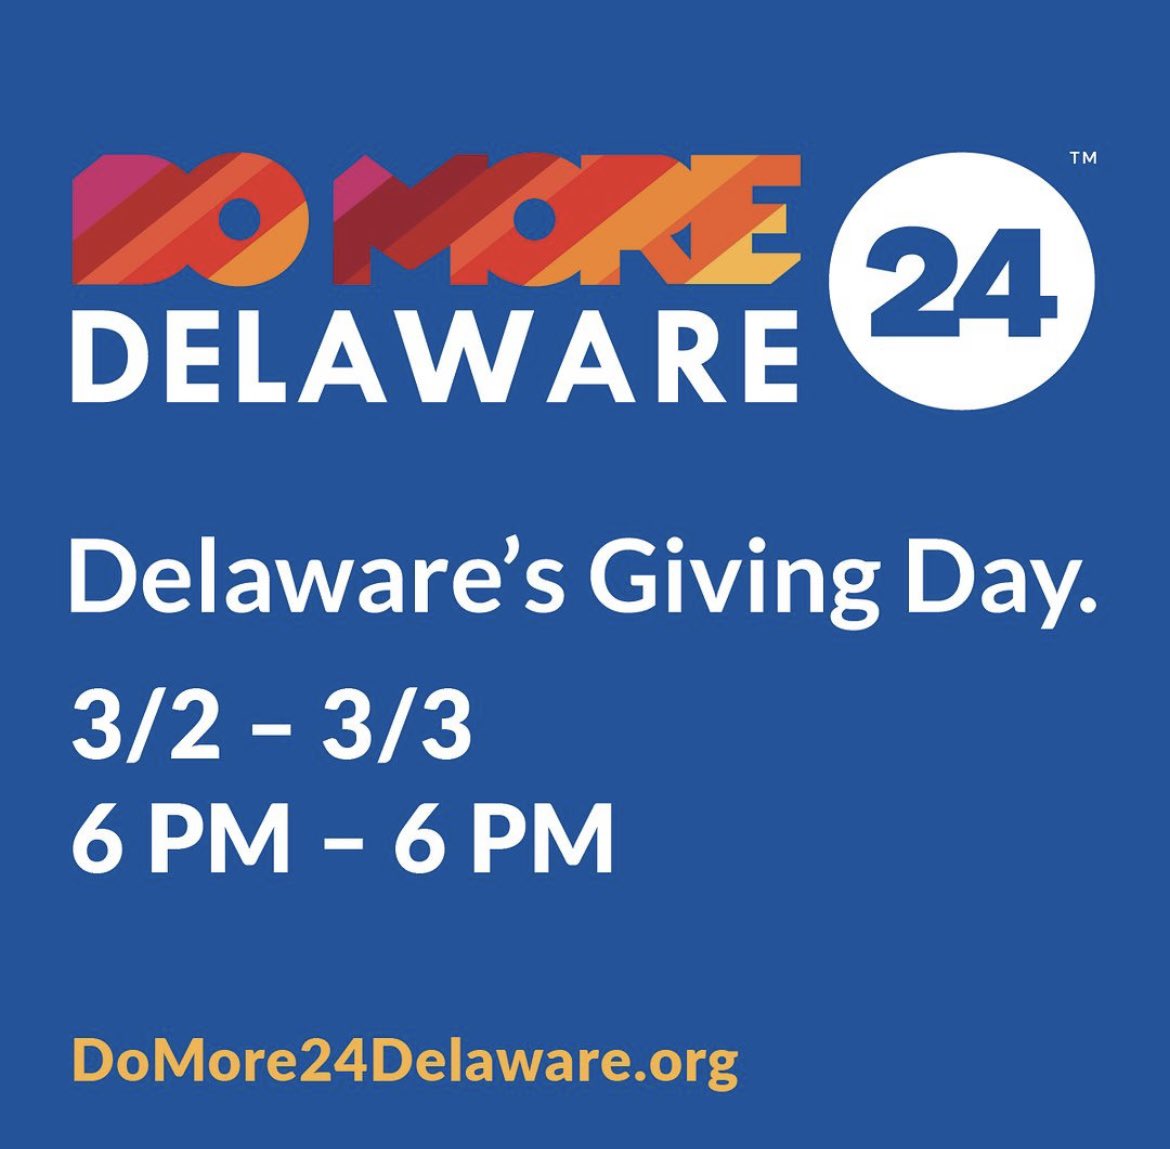 We are excited to join the #DoMore24DE fundraising event once again! With your generous support, we can reach our goal of $5,000. Our services make an impactful difference, and your support helps!